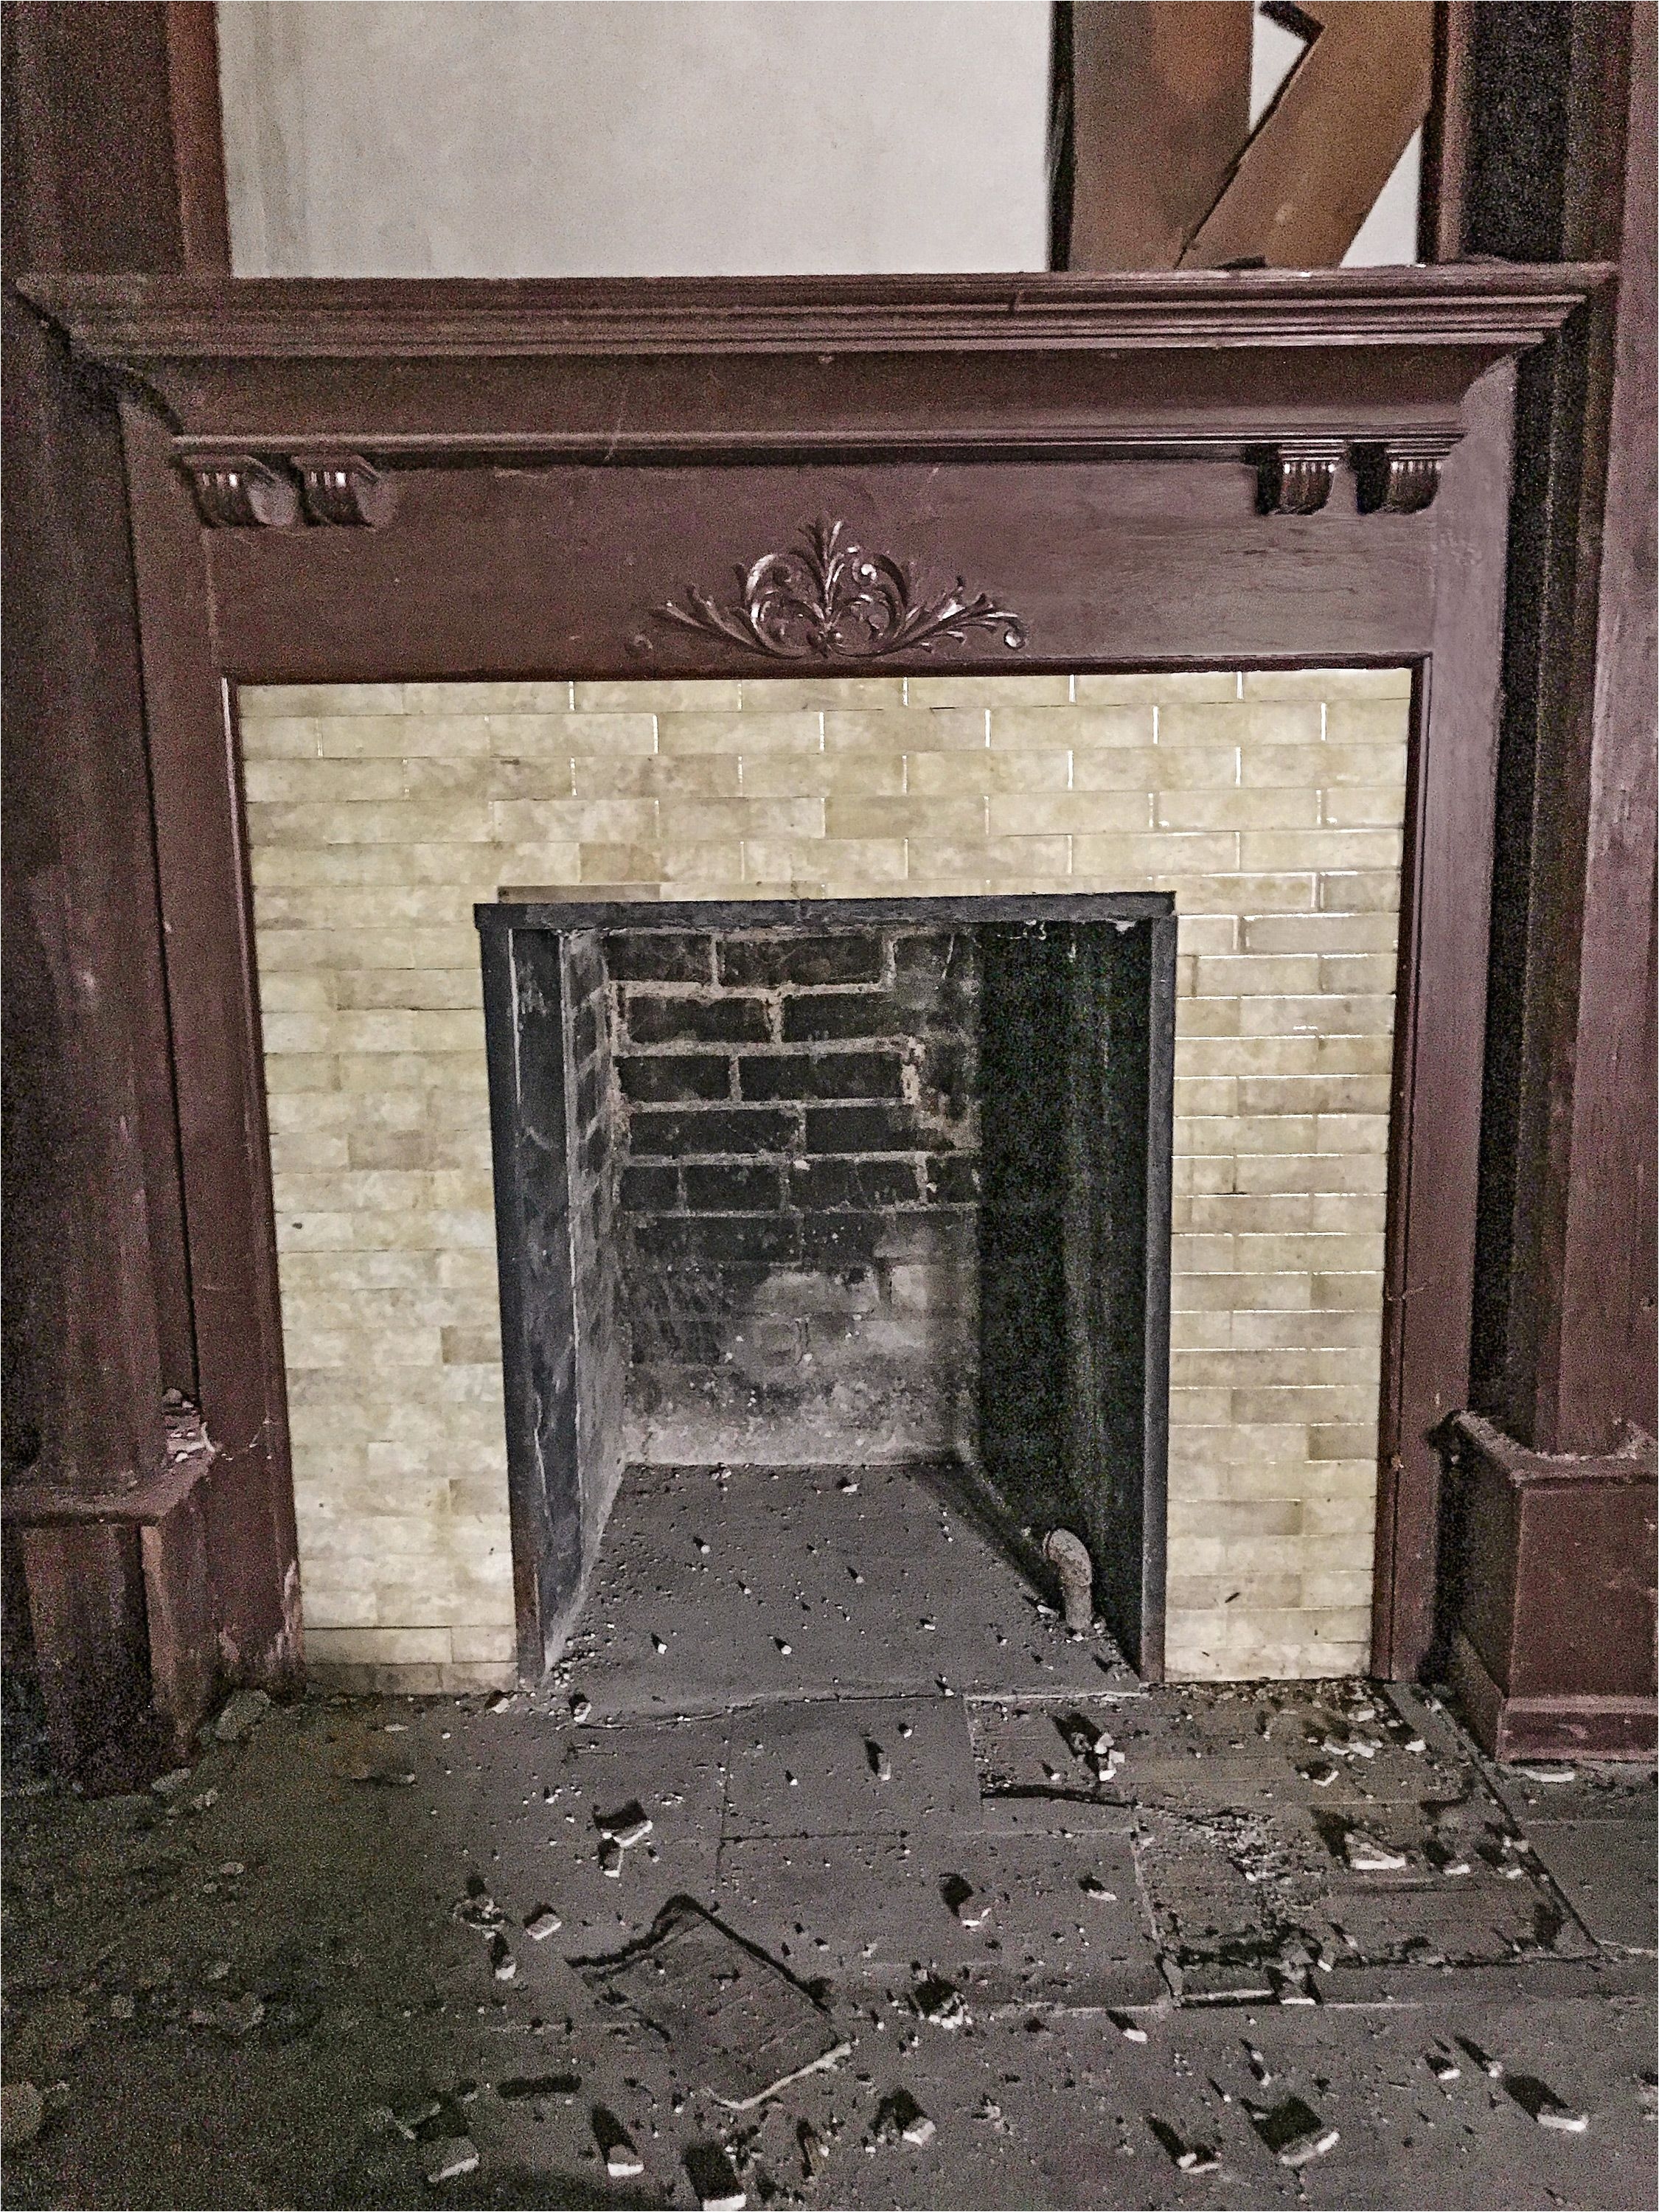 refurbished victorian fireplaces save this old house tudor revival in milwaukee house and restoration of refurbished victorian fireplaces